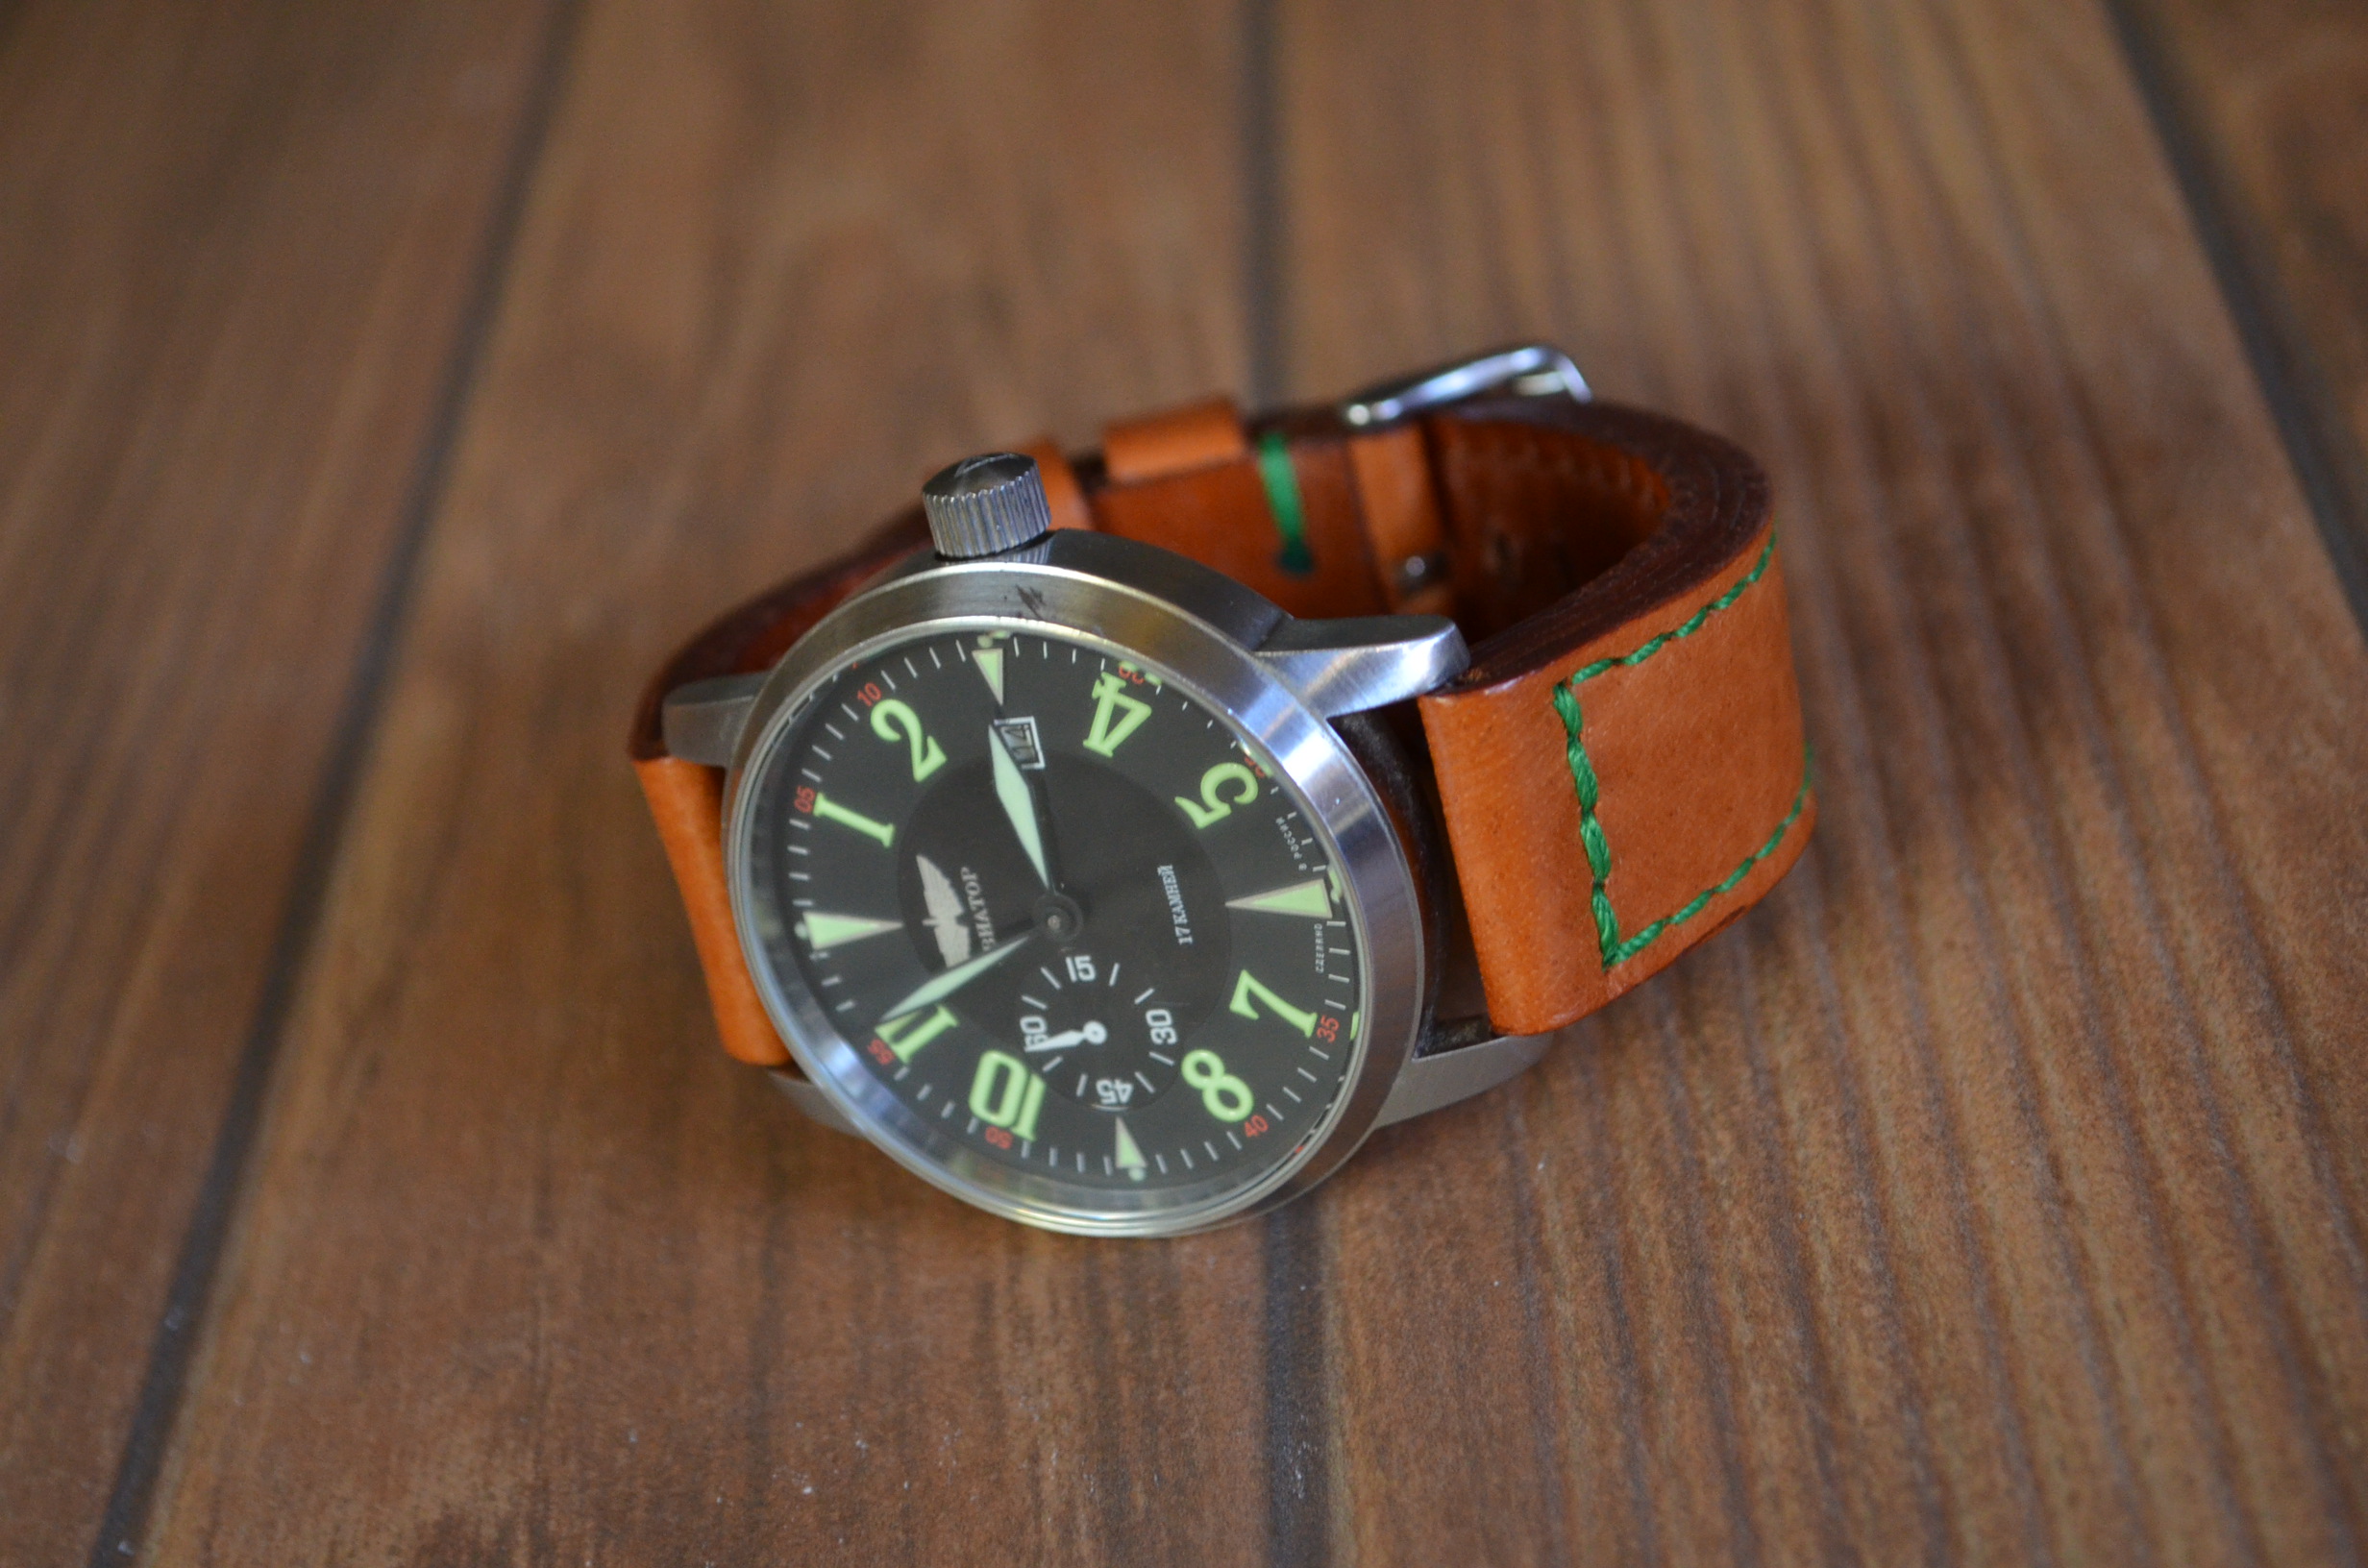 HAVANA GR is one of our hand crafted watch straps. Available in havana color, 5.5 - 6 mm thick.